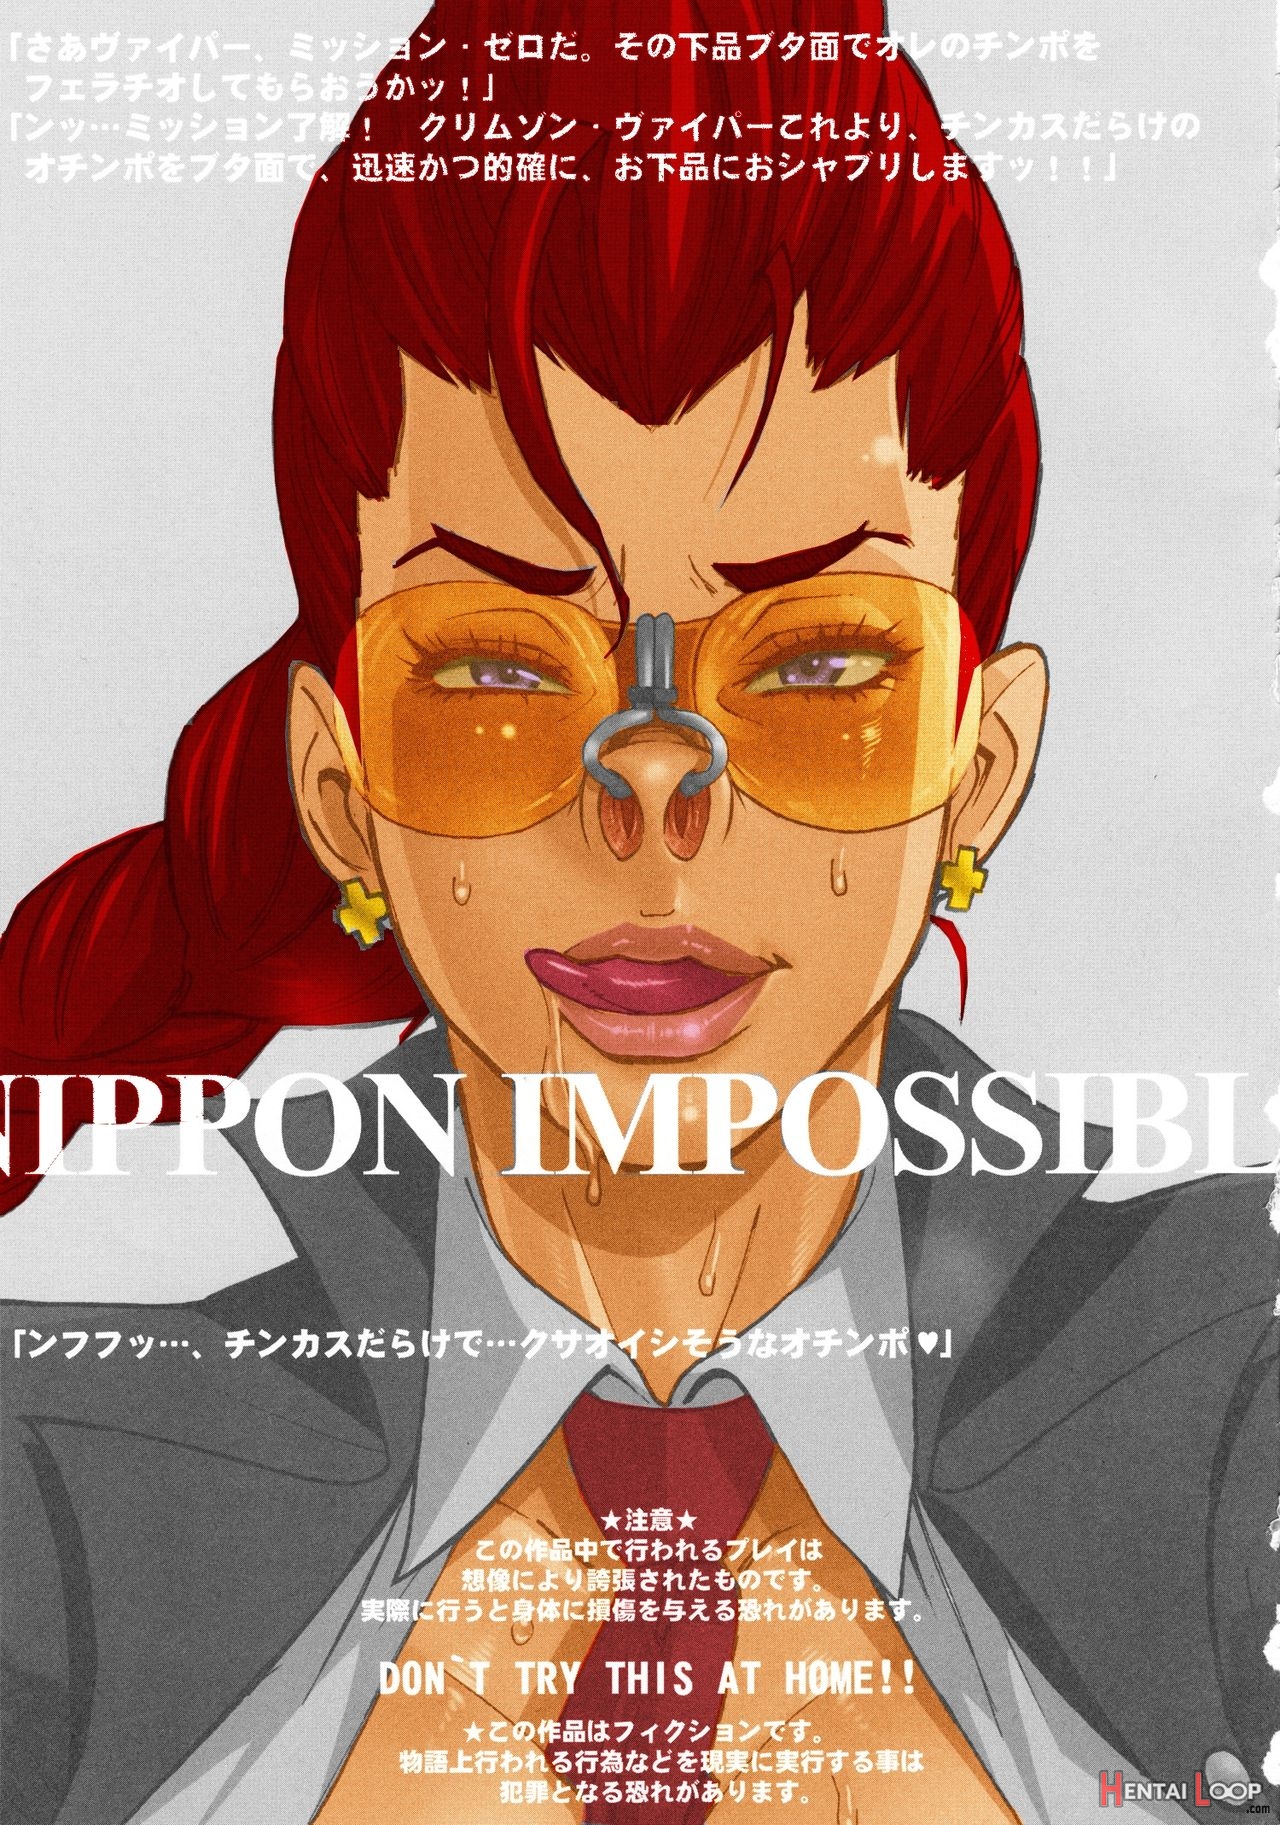 Nippon Impossible – Colorized page 2